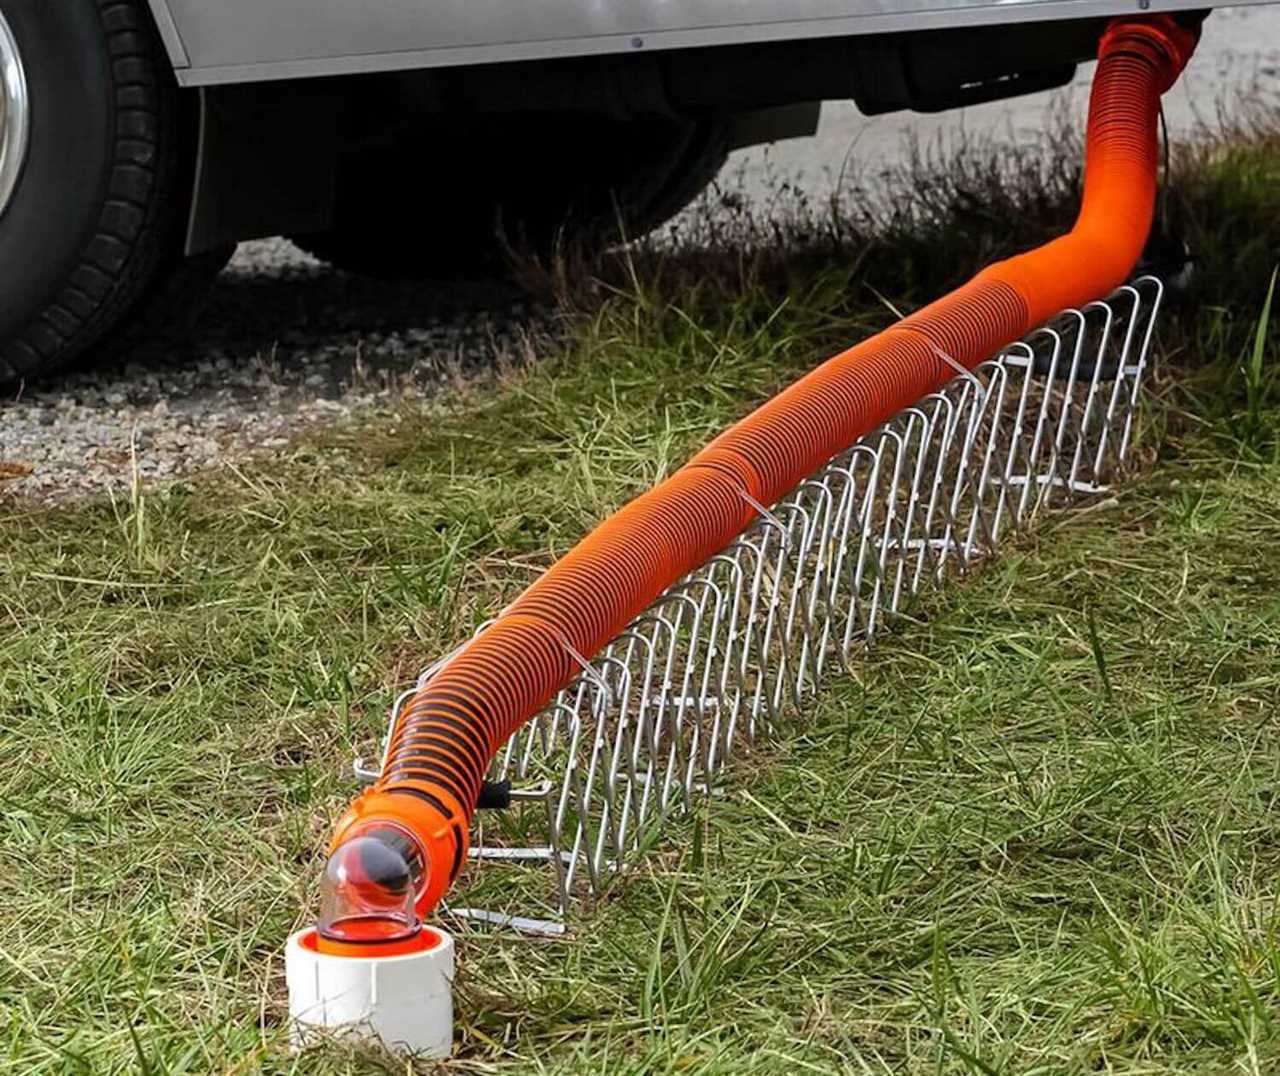 sewer-hose-support-how-to-empty-rv-holding-tanks-03-2022